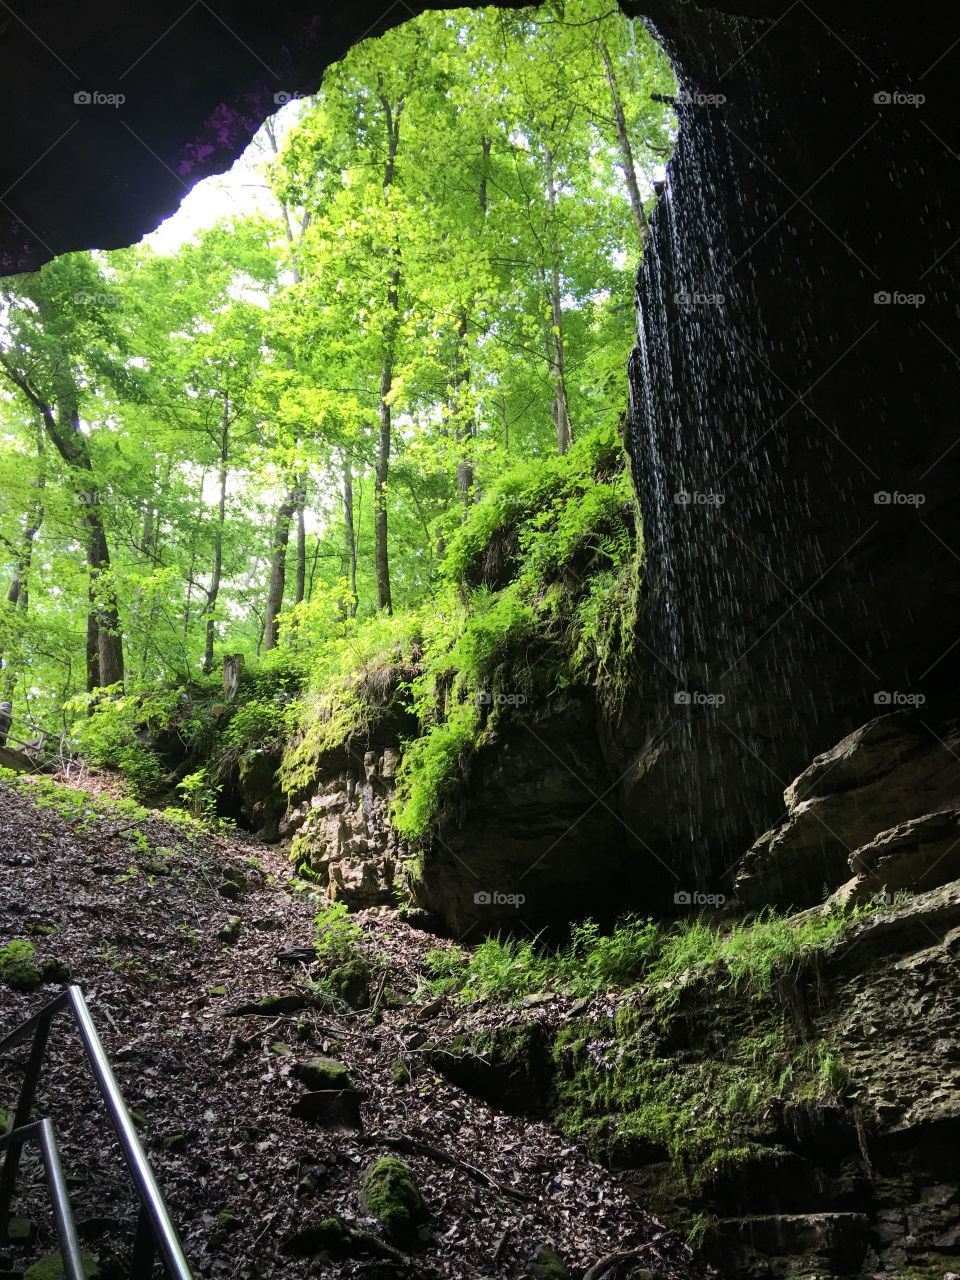 Exiting Mammoth Cave through the original entrance. Coming back to the light after darkness.